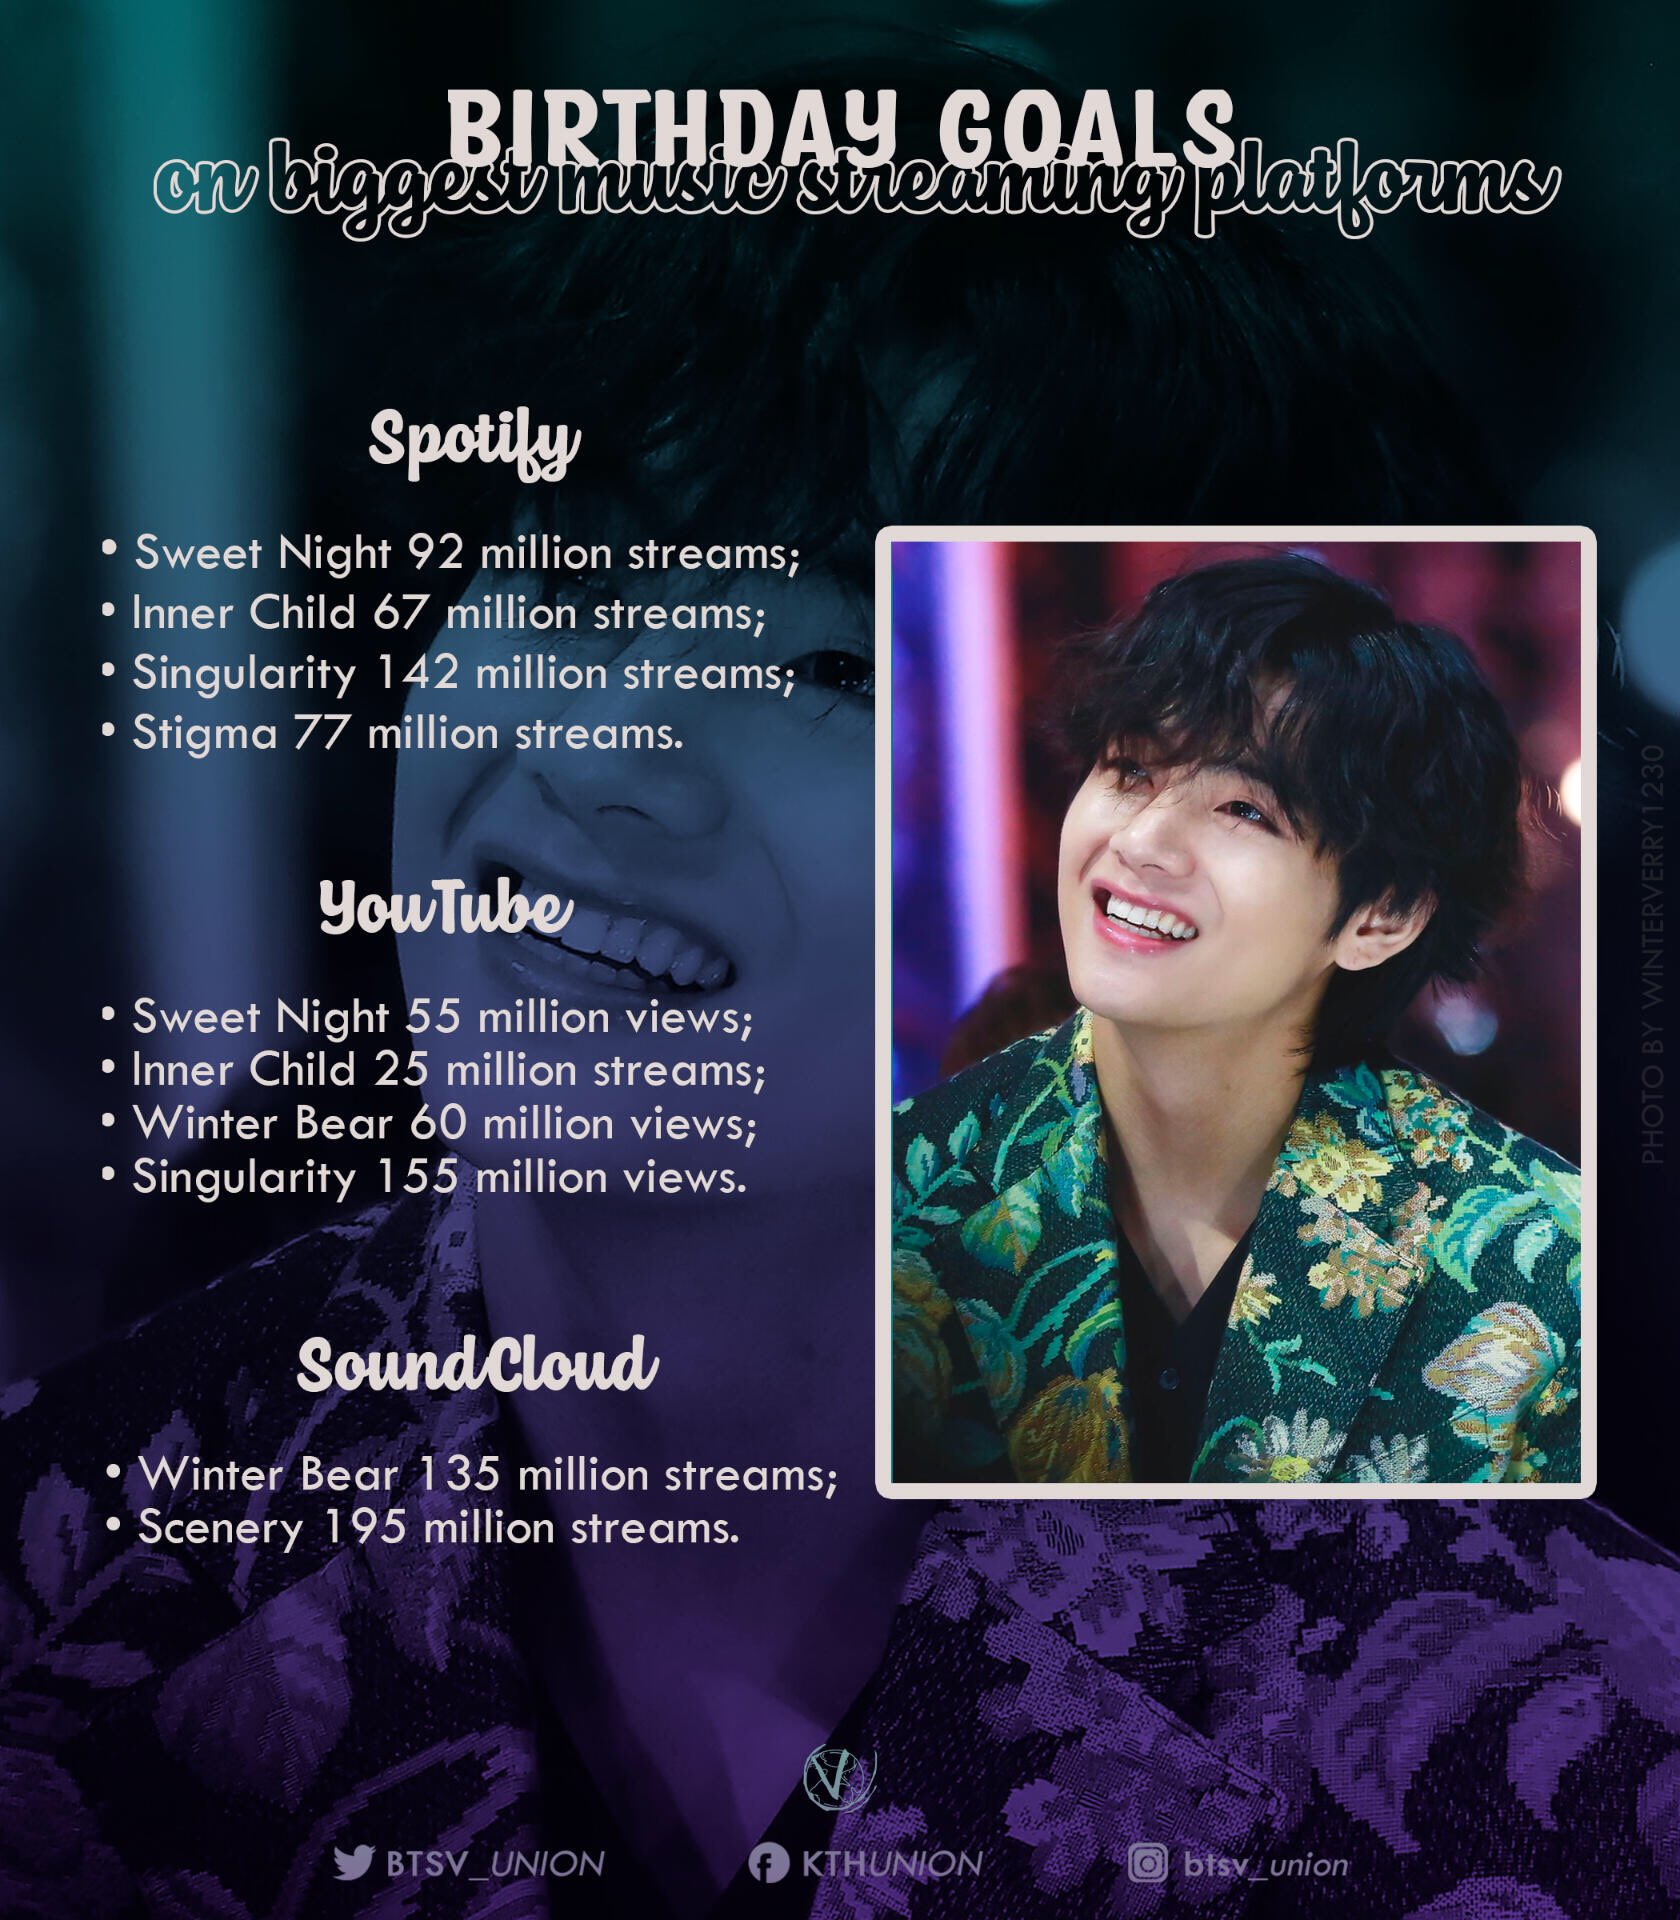 Bts V News Reminder Please Review Our Streaming Goals For Tae S Birthday For Ease Of Finding We Also Posted It Here A Google Vid From V Union These Are